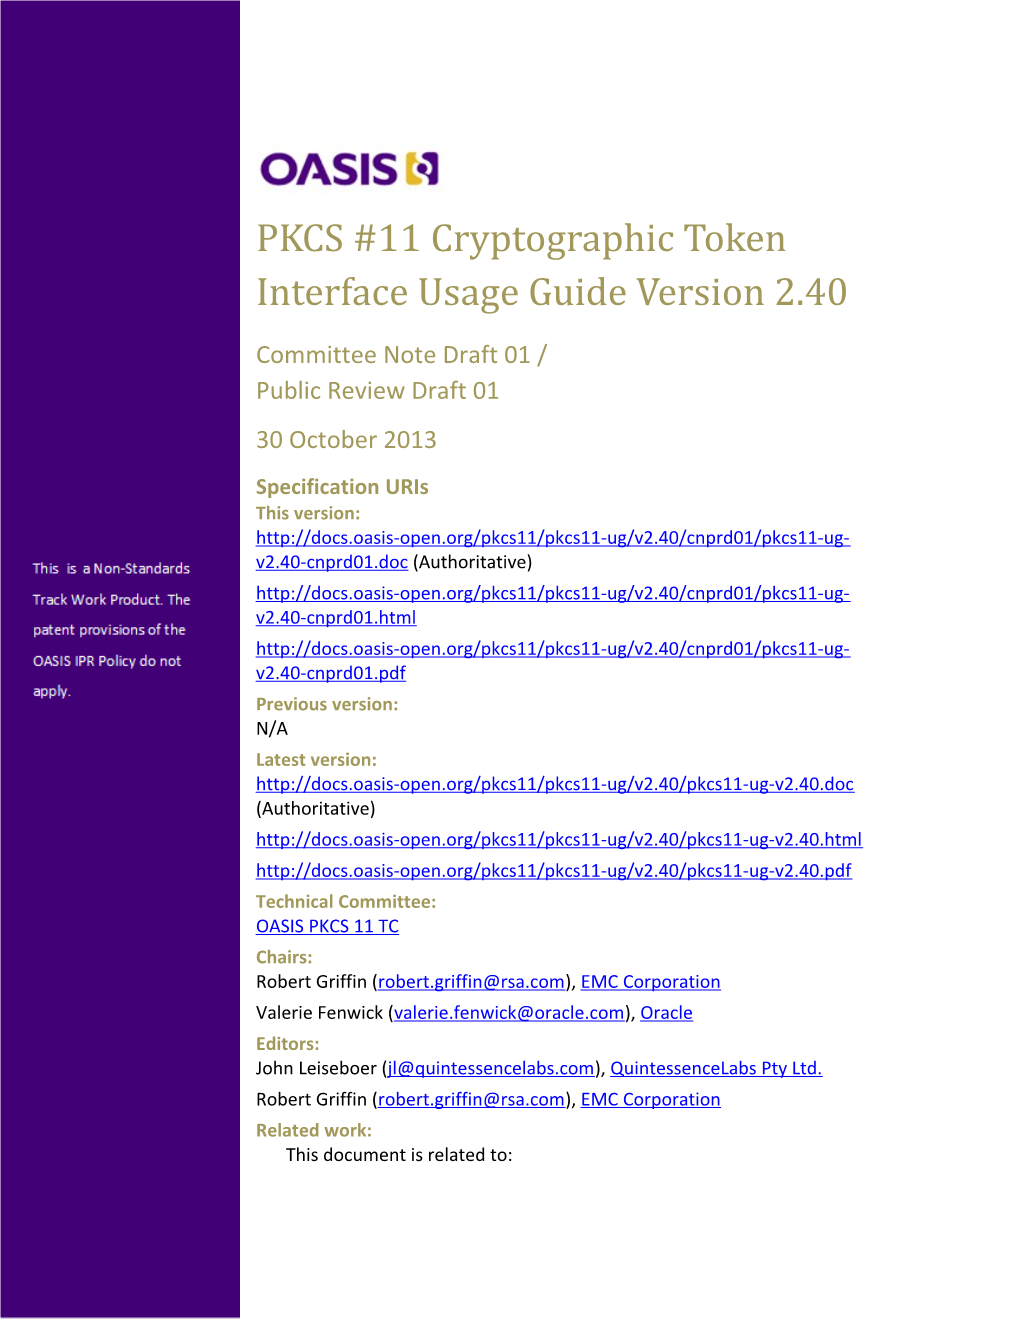 PKCS #11 Cryptographic Token Interface Usage Guide Version 2.40